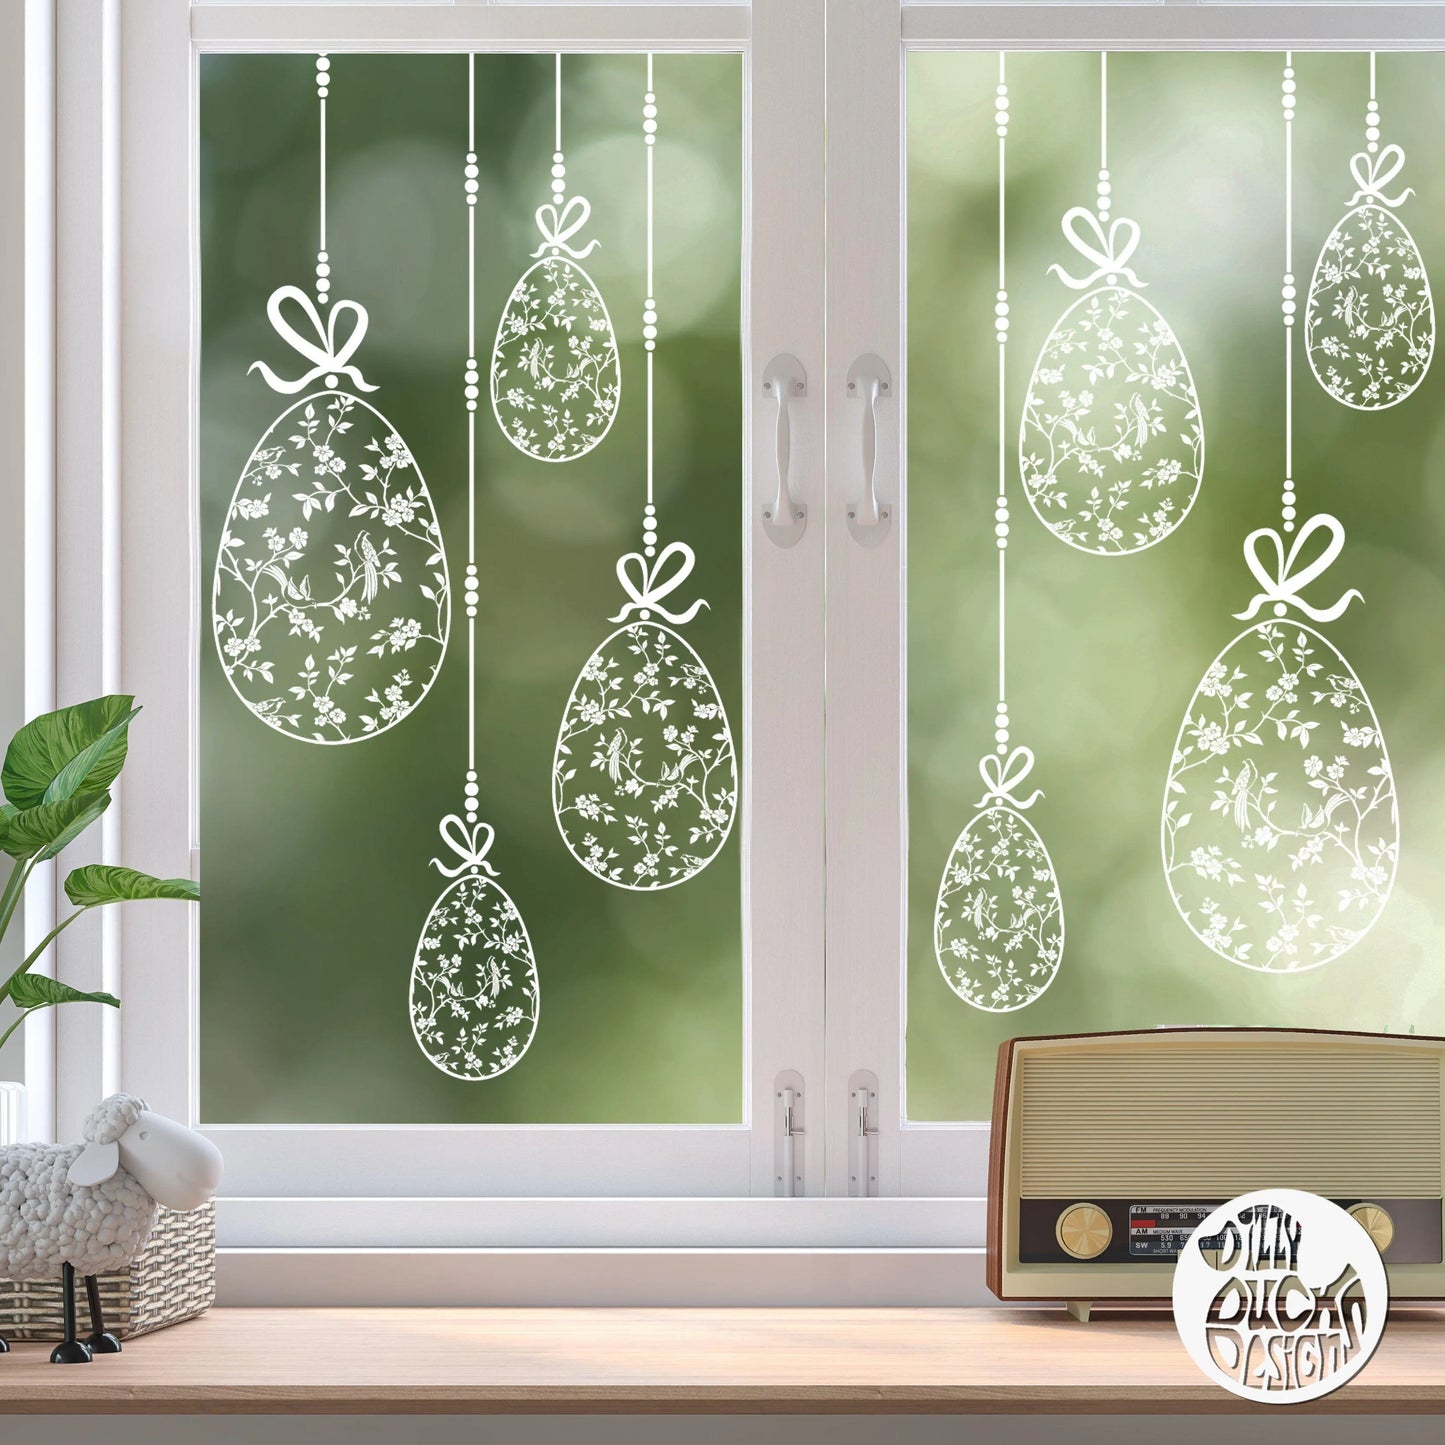 Decal 10 x Chinoiserie Easter Egg Window Decals - Clear Dizzy Duck Designs